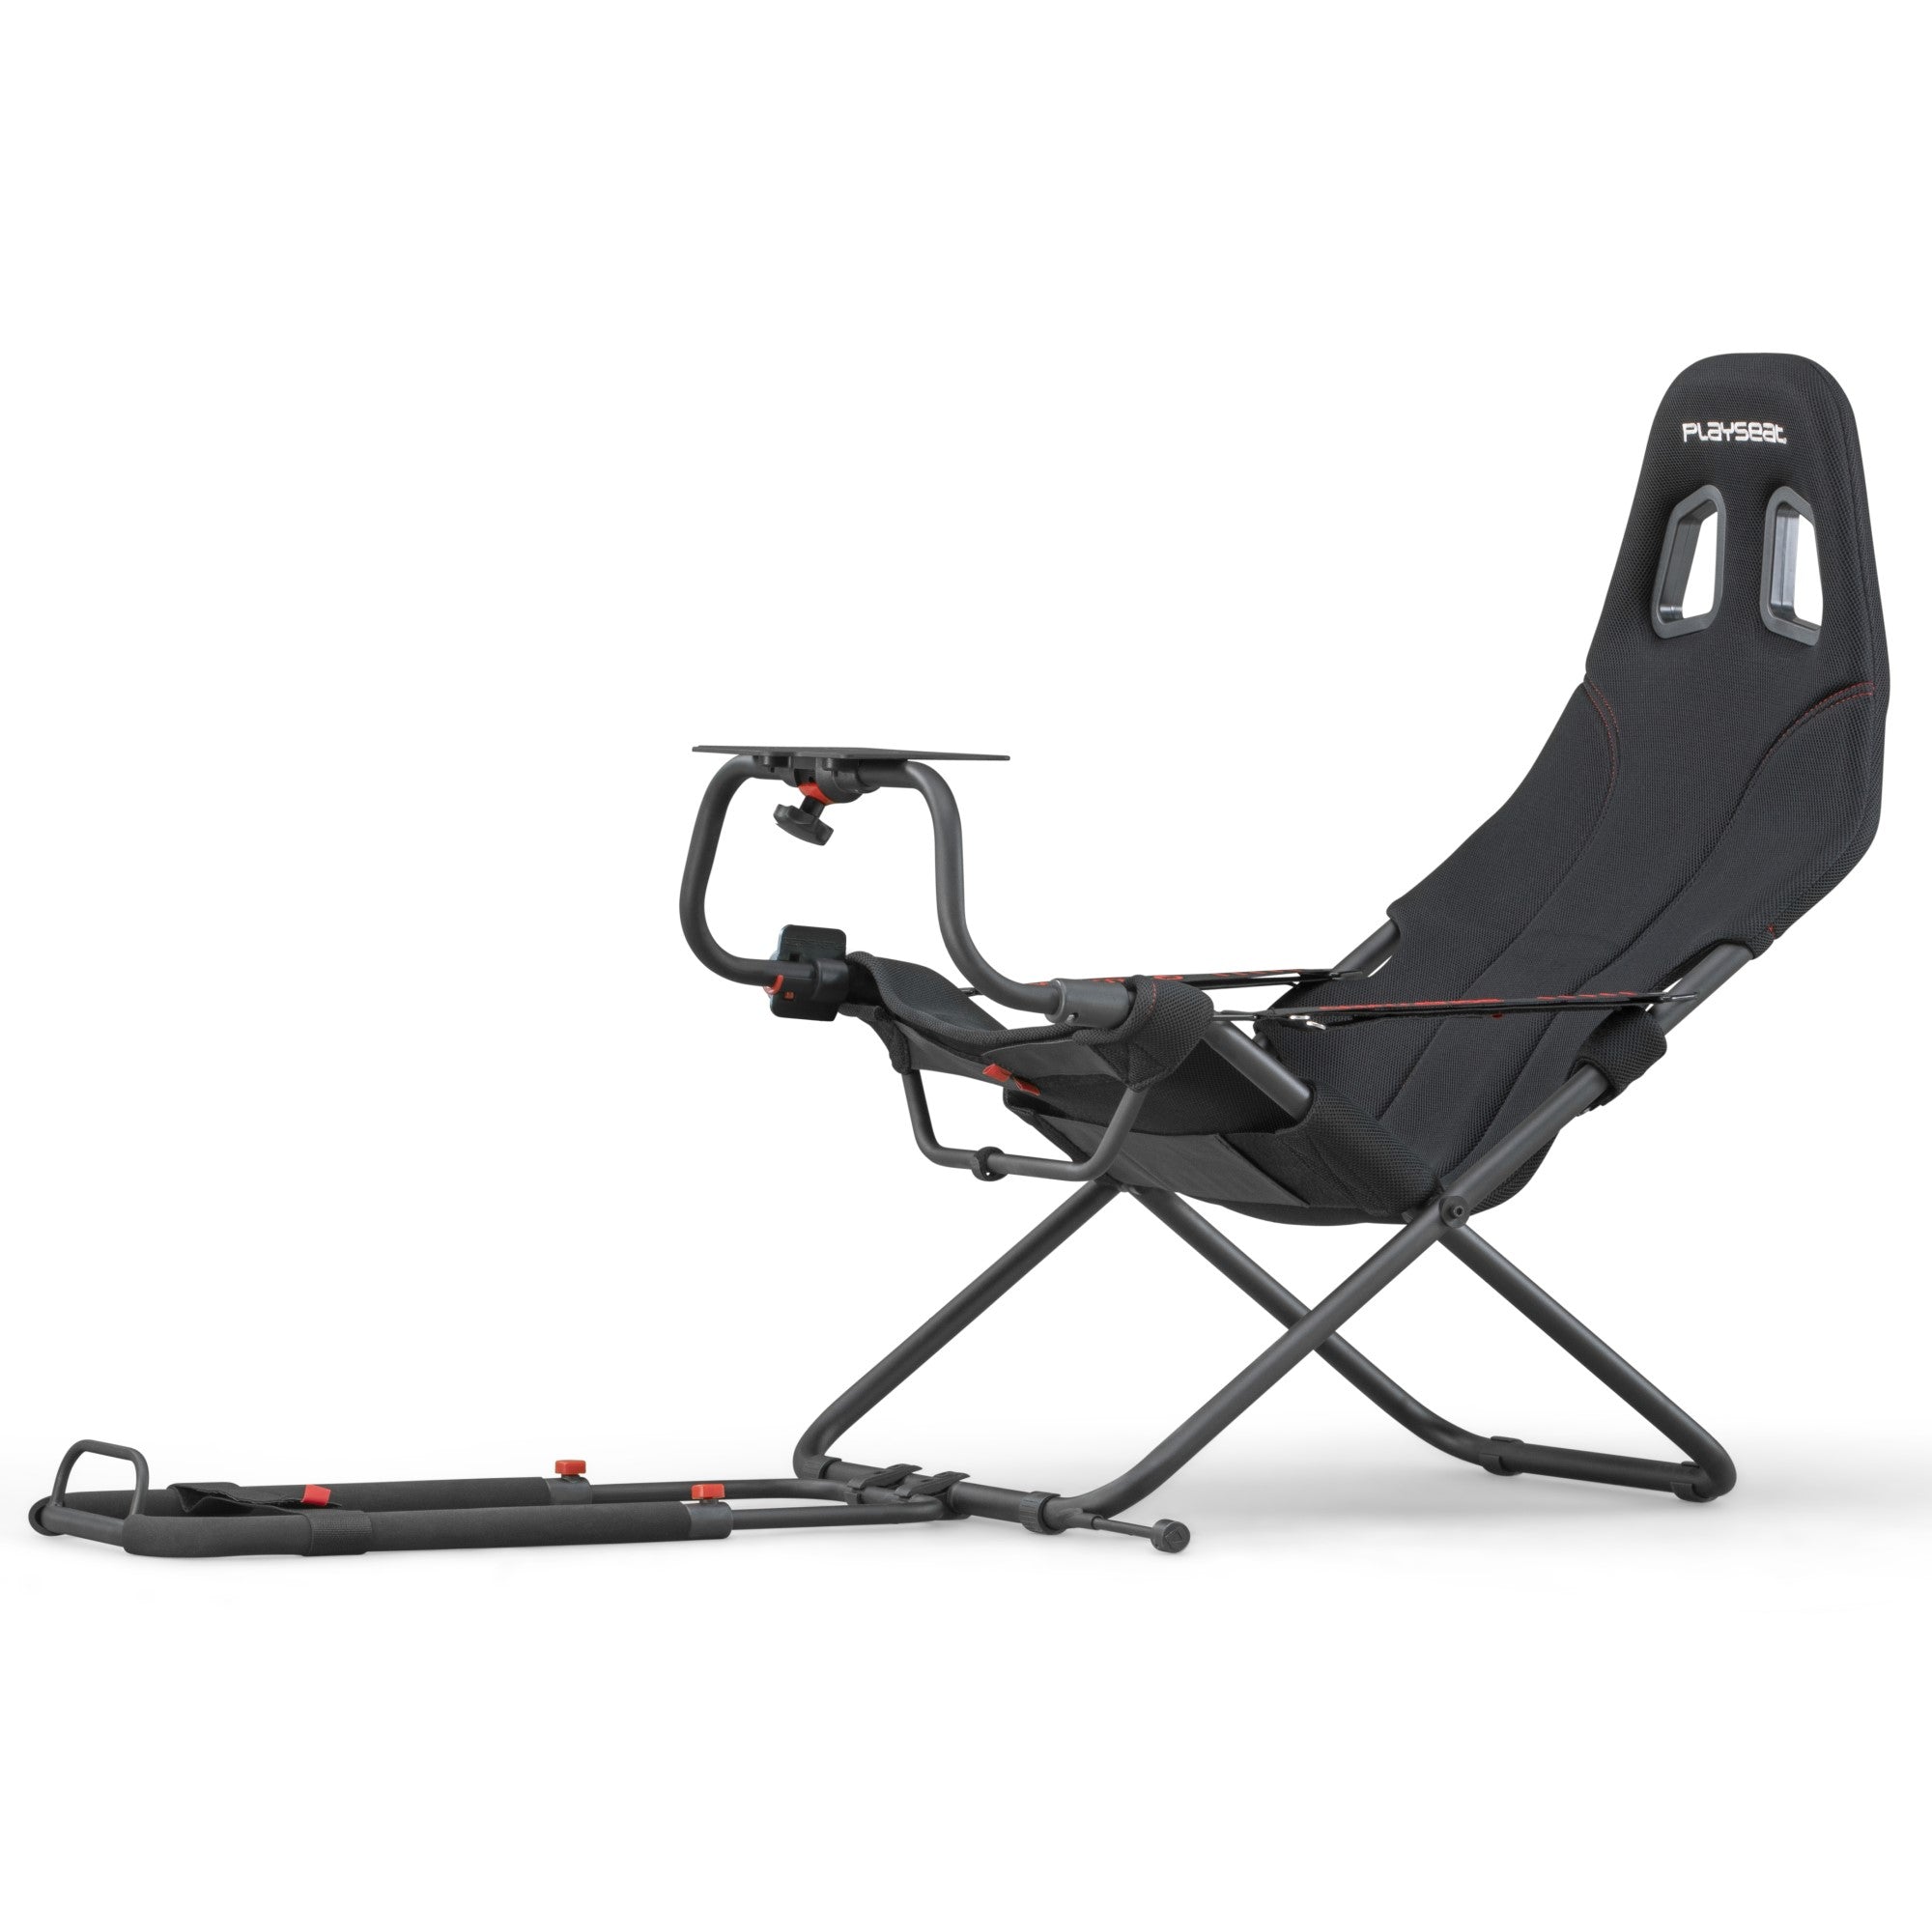 The Logitech G Playseat Challenge X lets you experience racing's